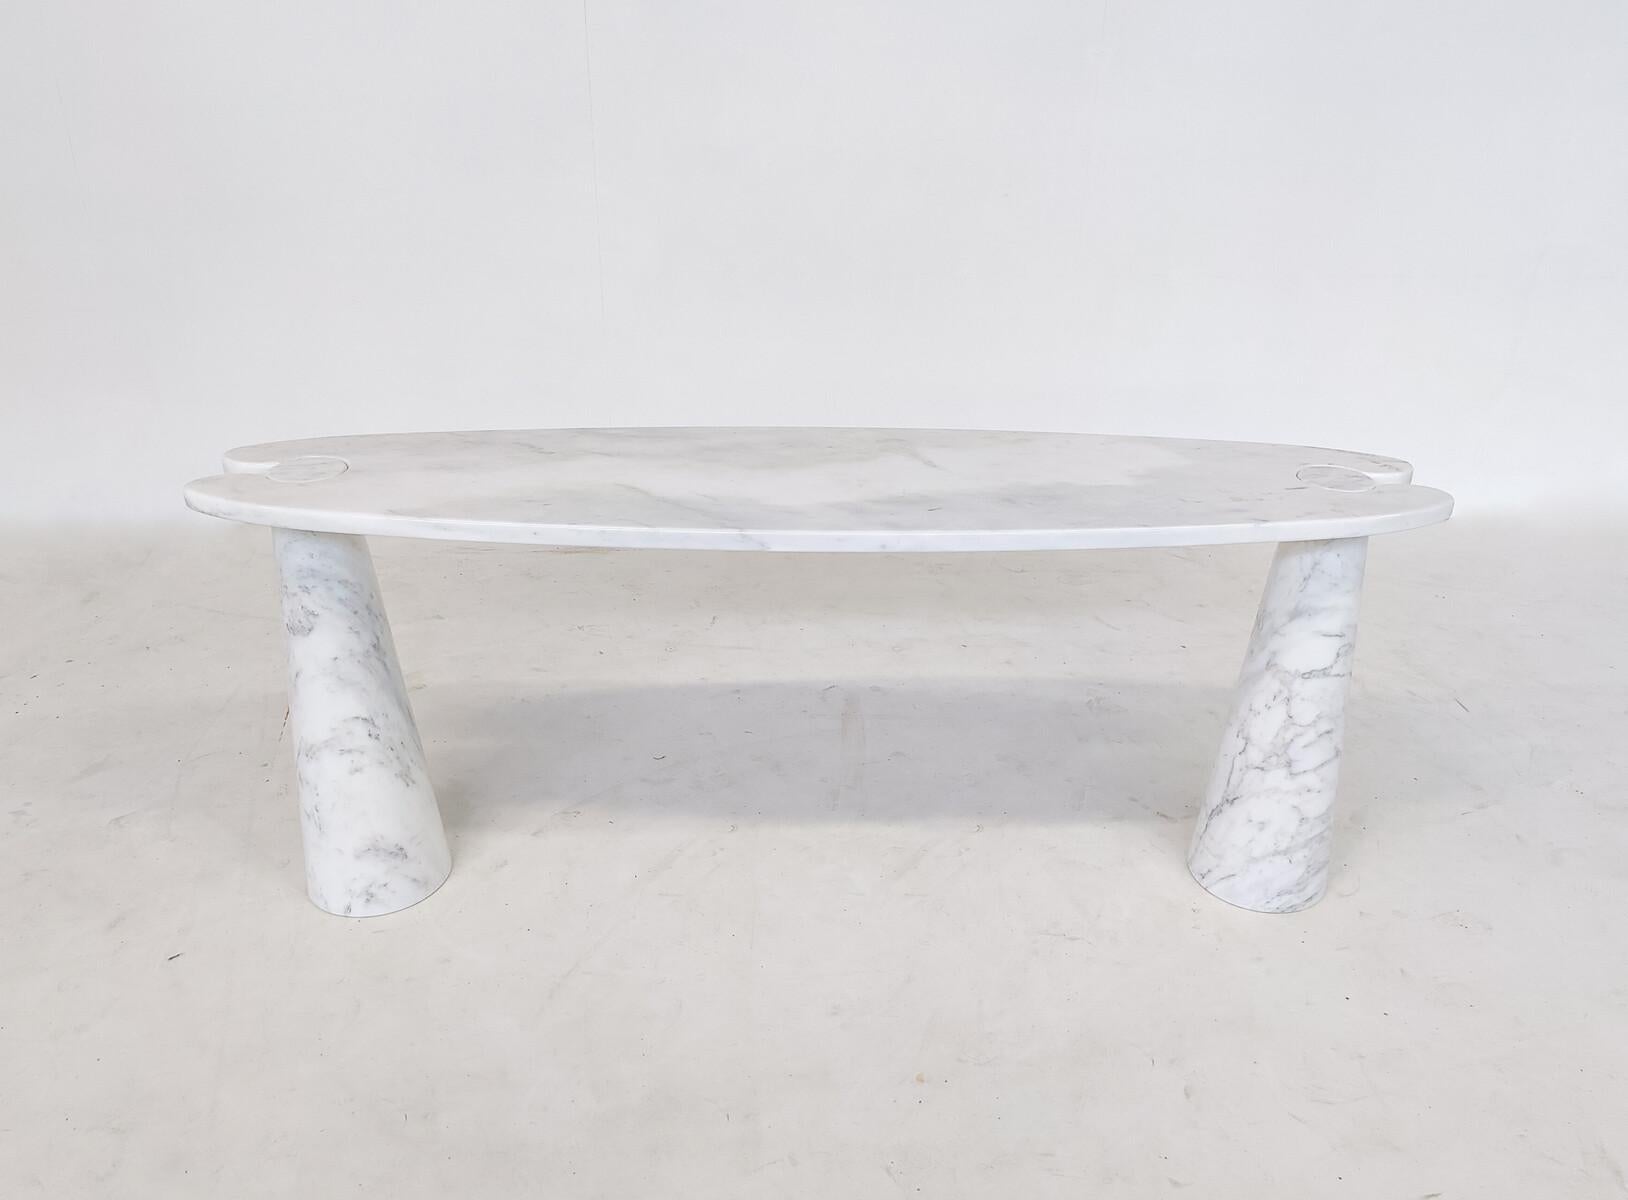 Midcentury Eros Console by Angelo Mangiarotti for Skipper, white marble, 1980s.